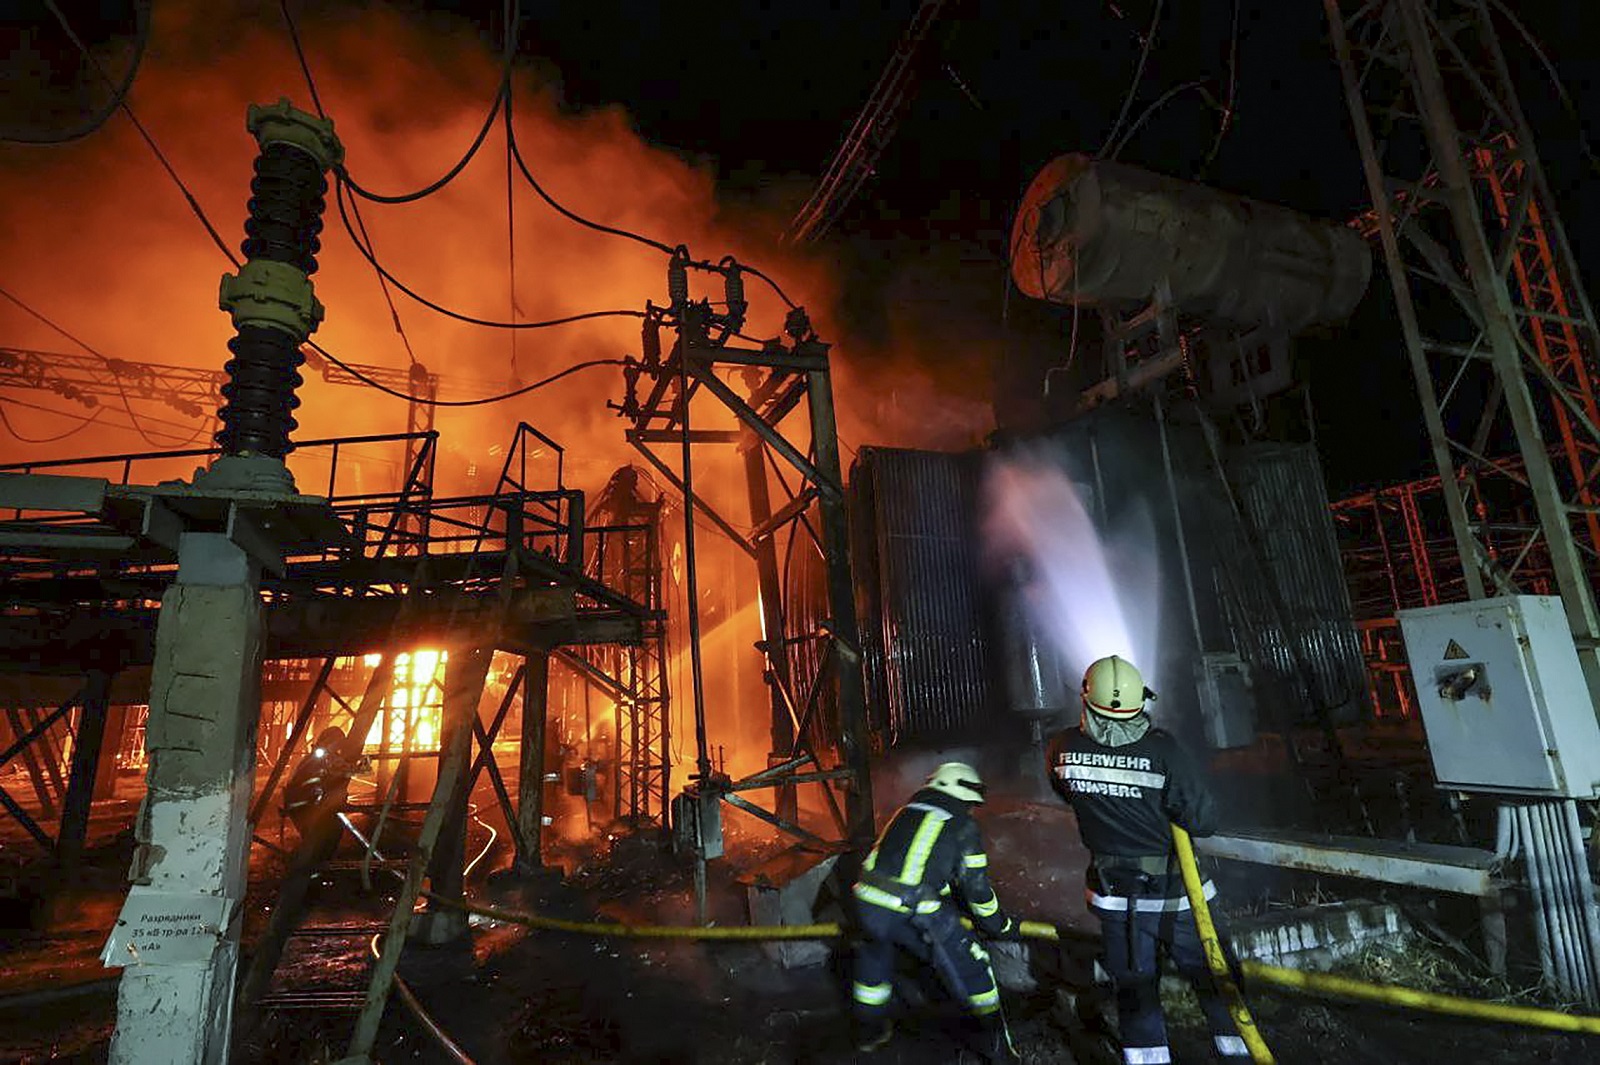 epa10178852 Ukrainian rescuers extinguish a fire after a rocket hit an infrastructure object in  Kharkiv, Ukraine, 11 September 2022 amid Russia's military invasion. Energy and water supply disappeared on Sunday evening in many districts of Kharkiv after Russian rockets hit an infrastructure facility, Mayor Ihor Terekhov said. Kharkiv and surrounding areas have been the target of heavy shelling since February 2022, when Russian troops entered Ukraine starting a conflict that has provoked destruction and a humanitarian crisis.  EPA/SERGEY KOZLOV